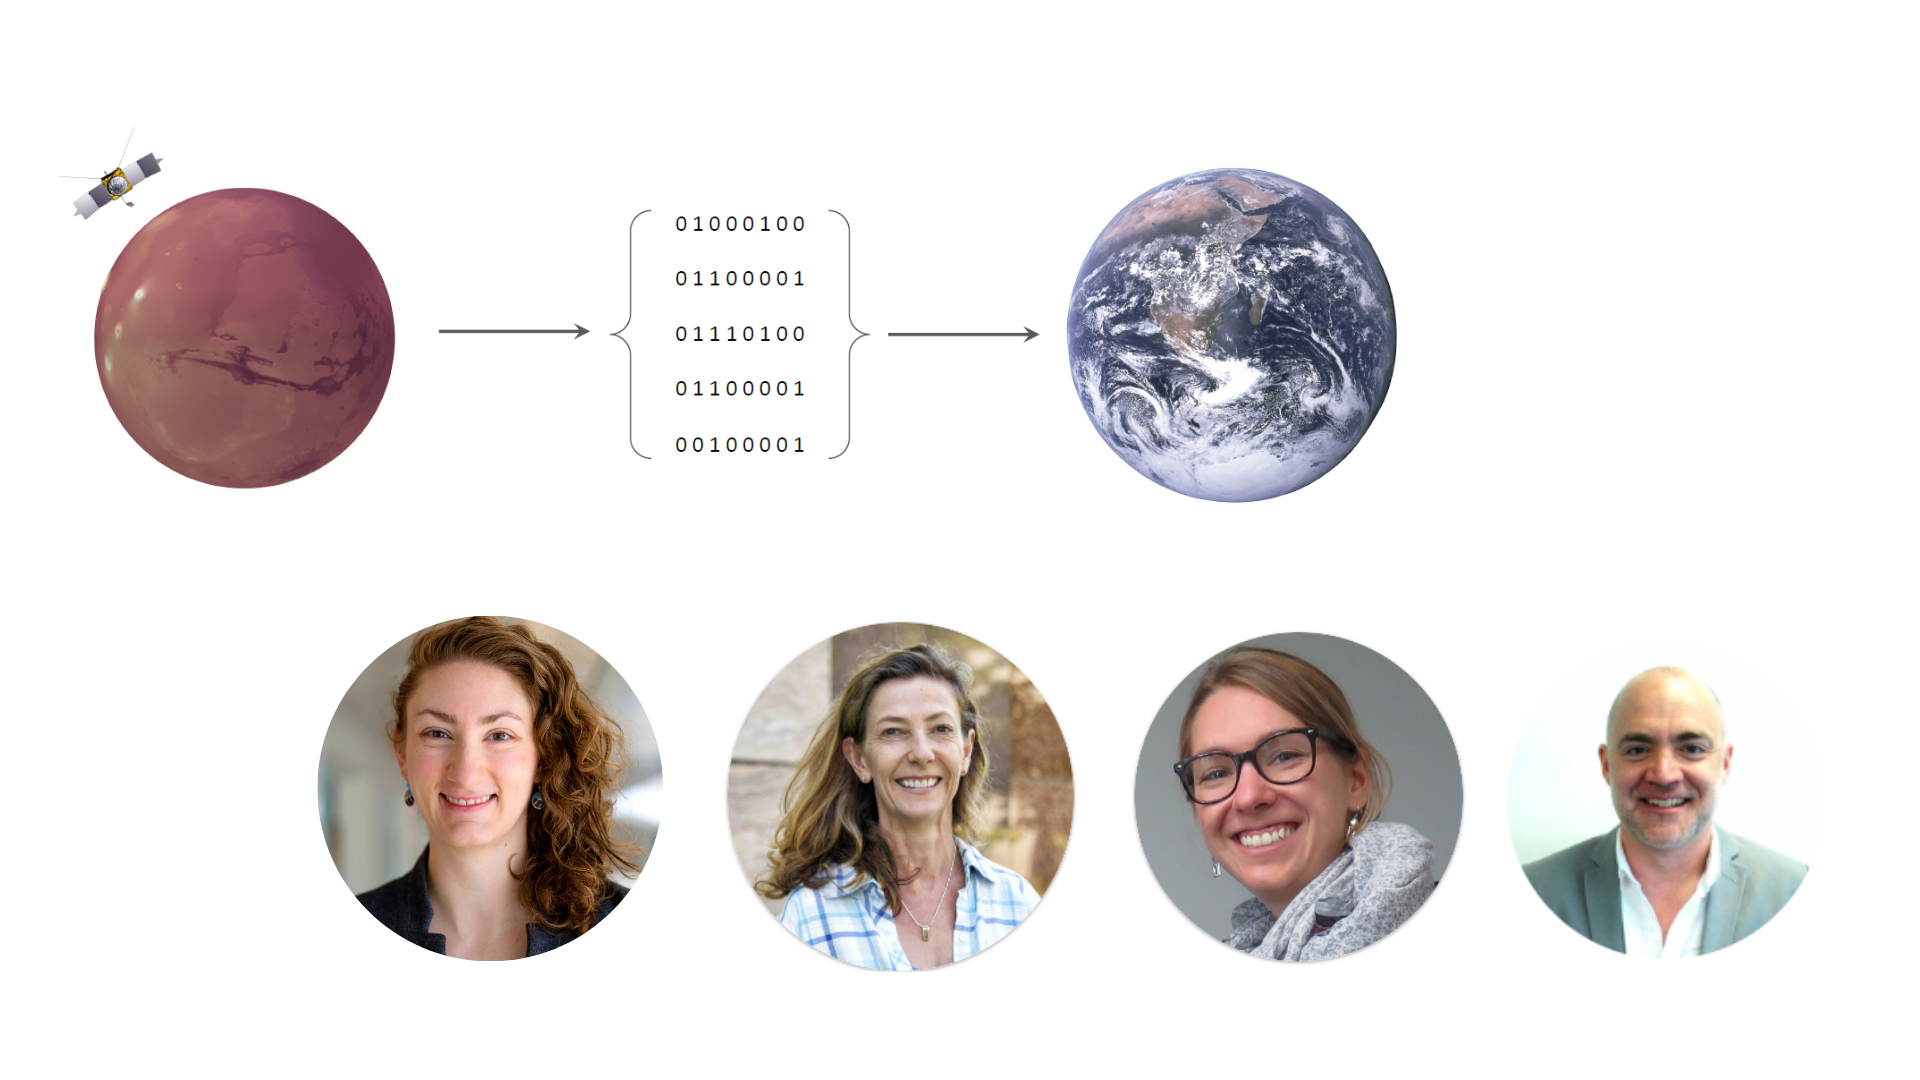 Clipart of Earth and Mars featuring images of the researchers below.